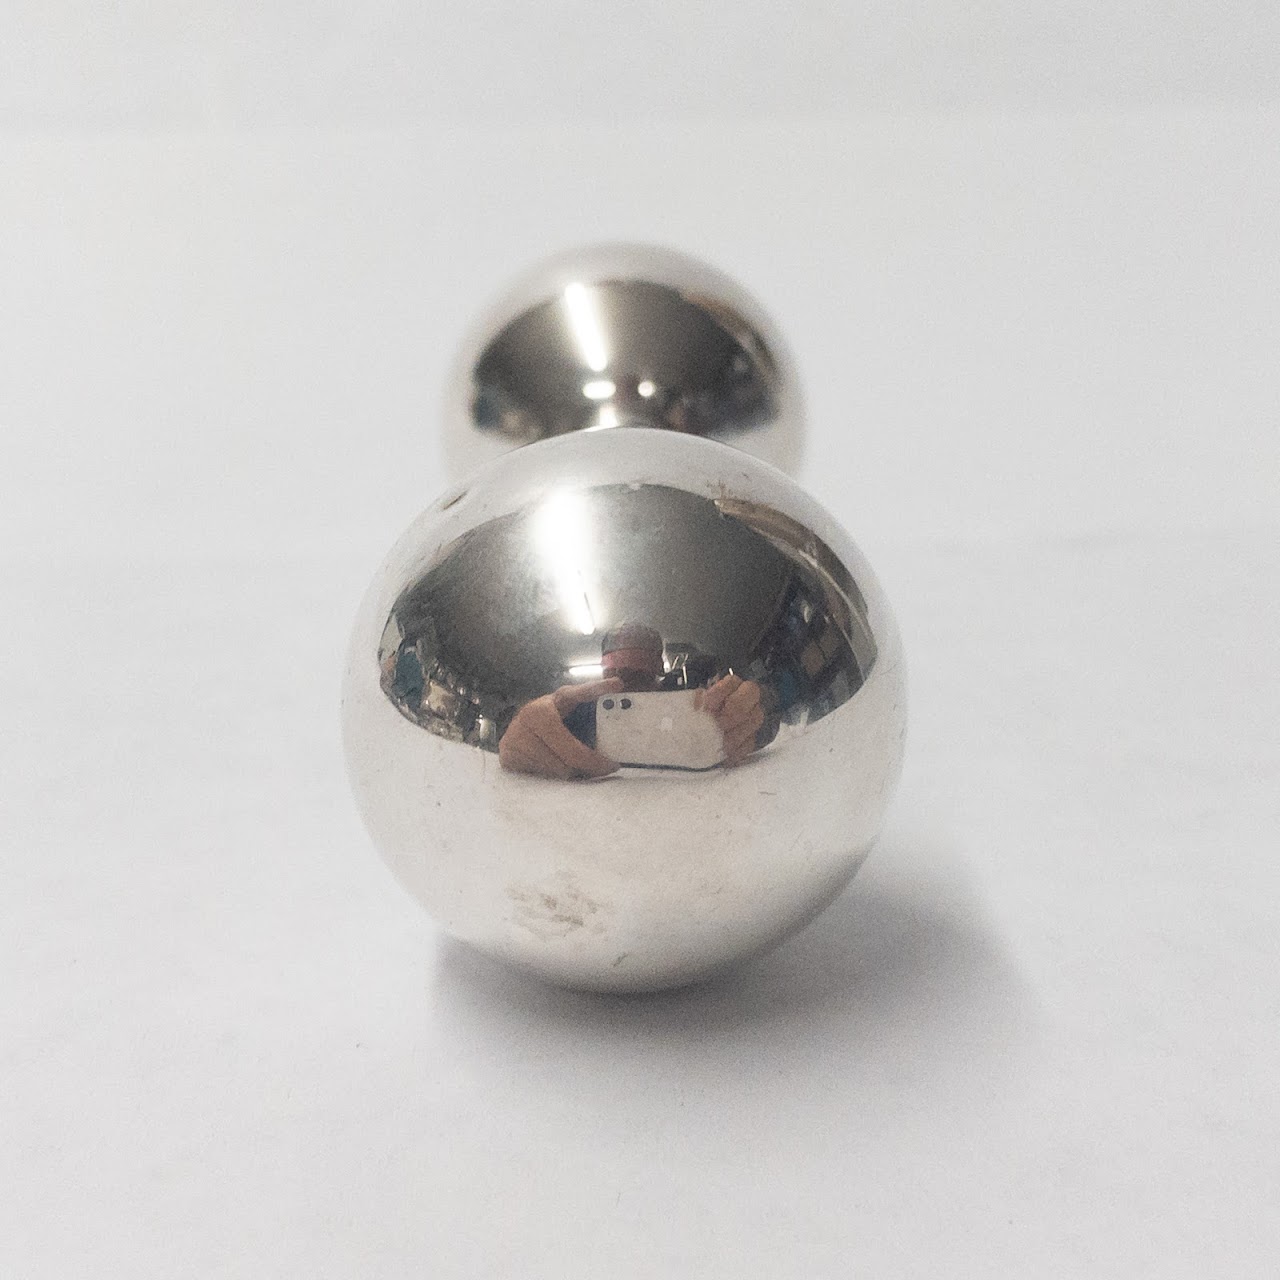 Tiffany & Co. Sterling  Silver Baby Rattle